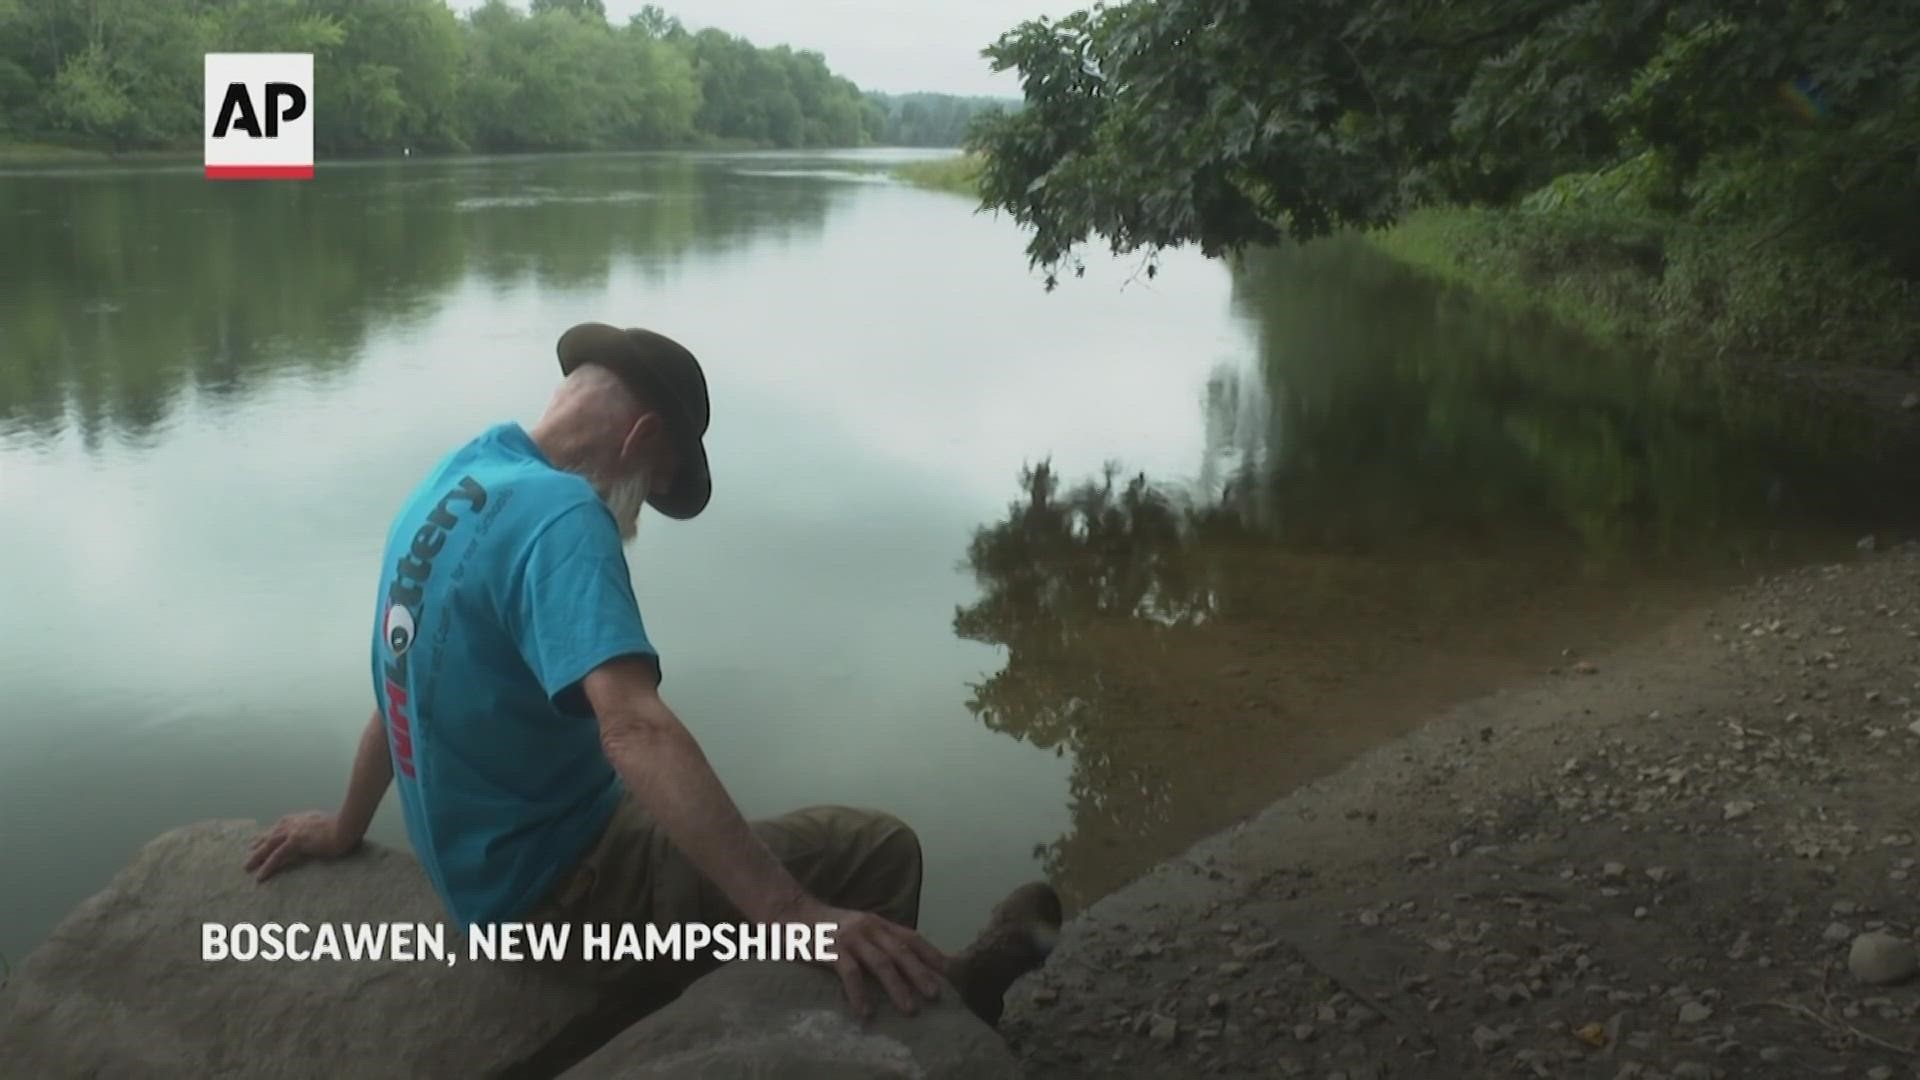 An off-the-grid New Hampshire hermit known as "River Dave" says he doesn't think he can return to his lifestyle.